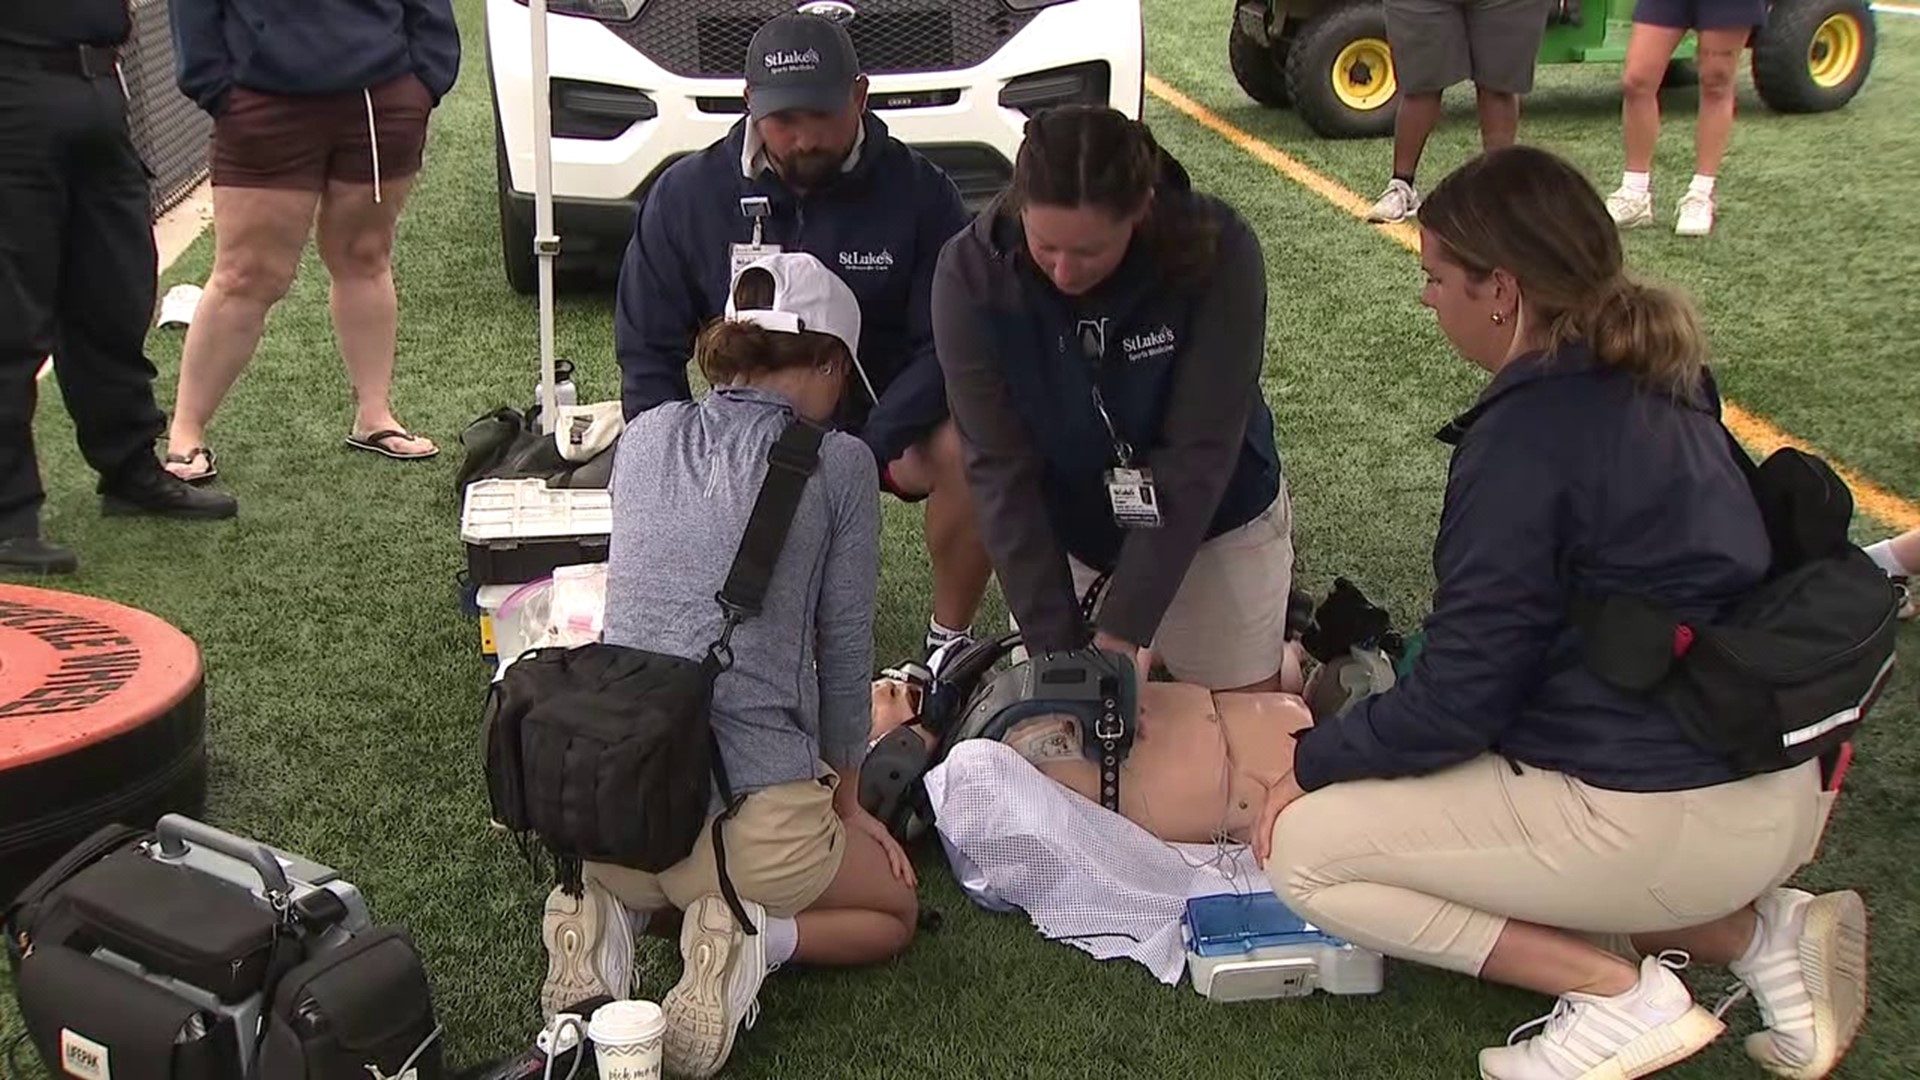 In a series of training exercises designed to simulate the response to a cardiac arrest event during a practice or a game, athletic trainers fine tuned their skills.